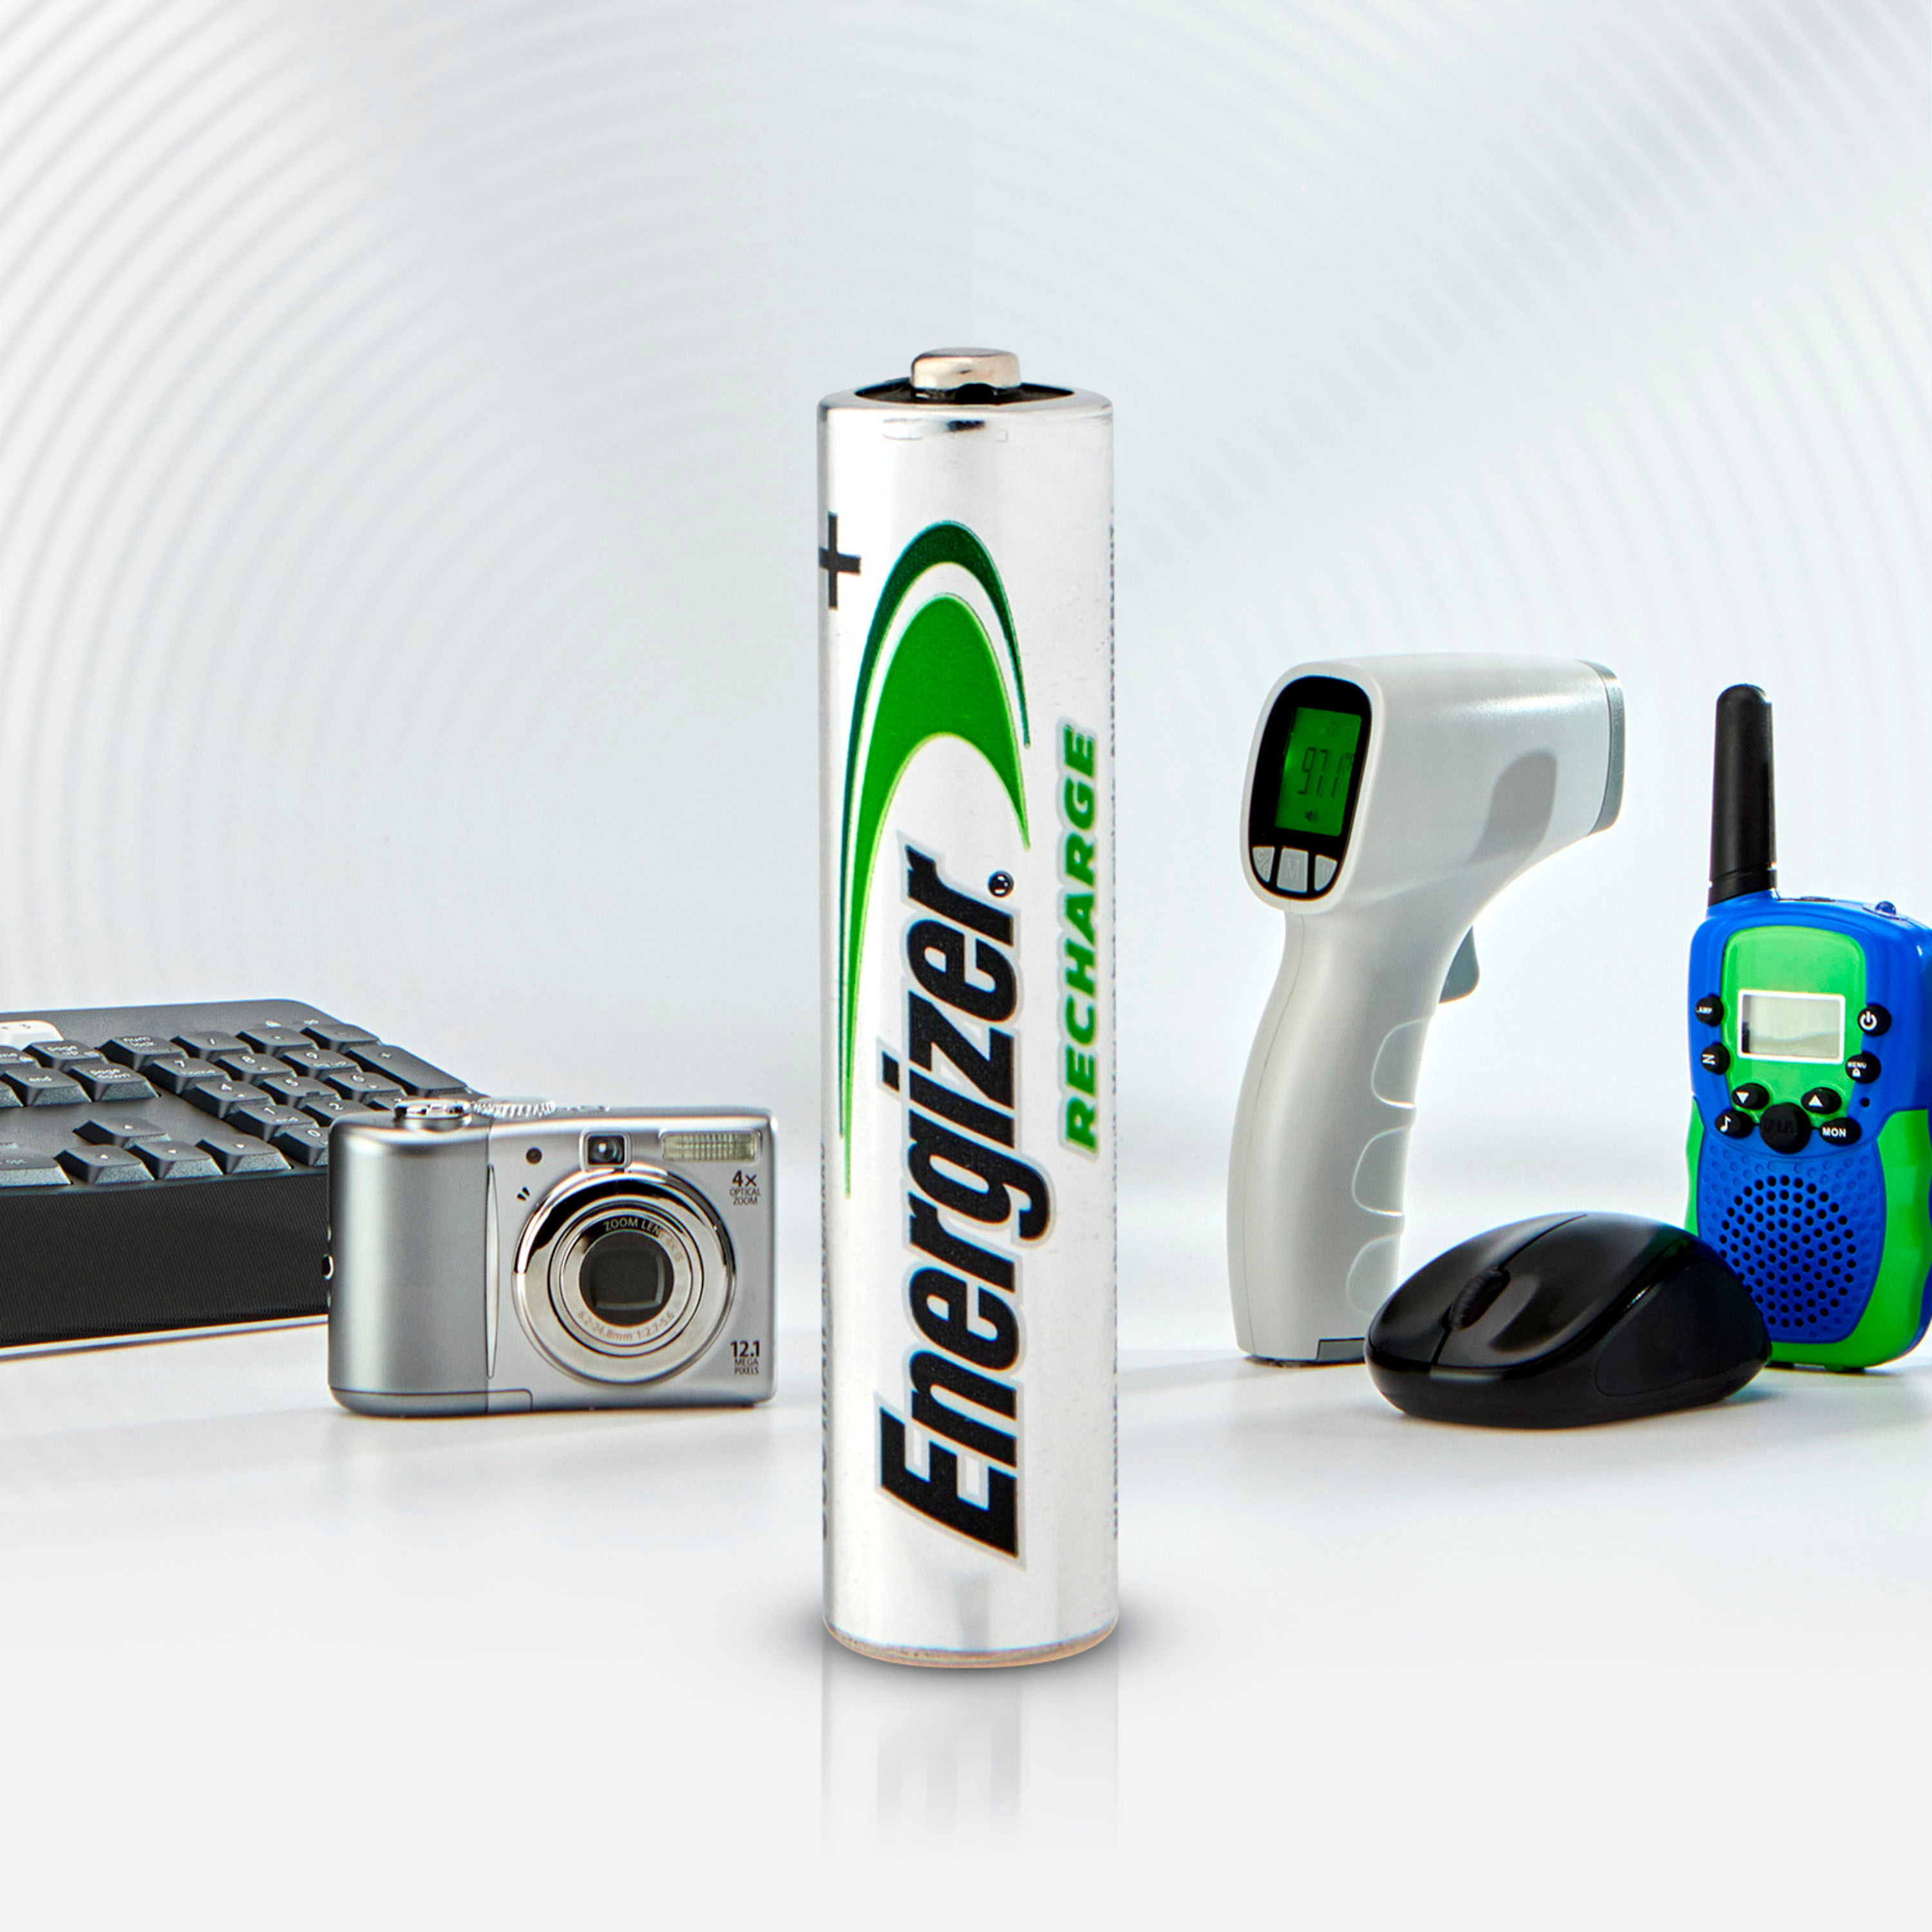 Pile rechargeable LR3 (AAA) NiMH Energizer Extreme HR03 E300624300 800 mAh  1.2 V 2 pc(s) W209871